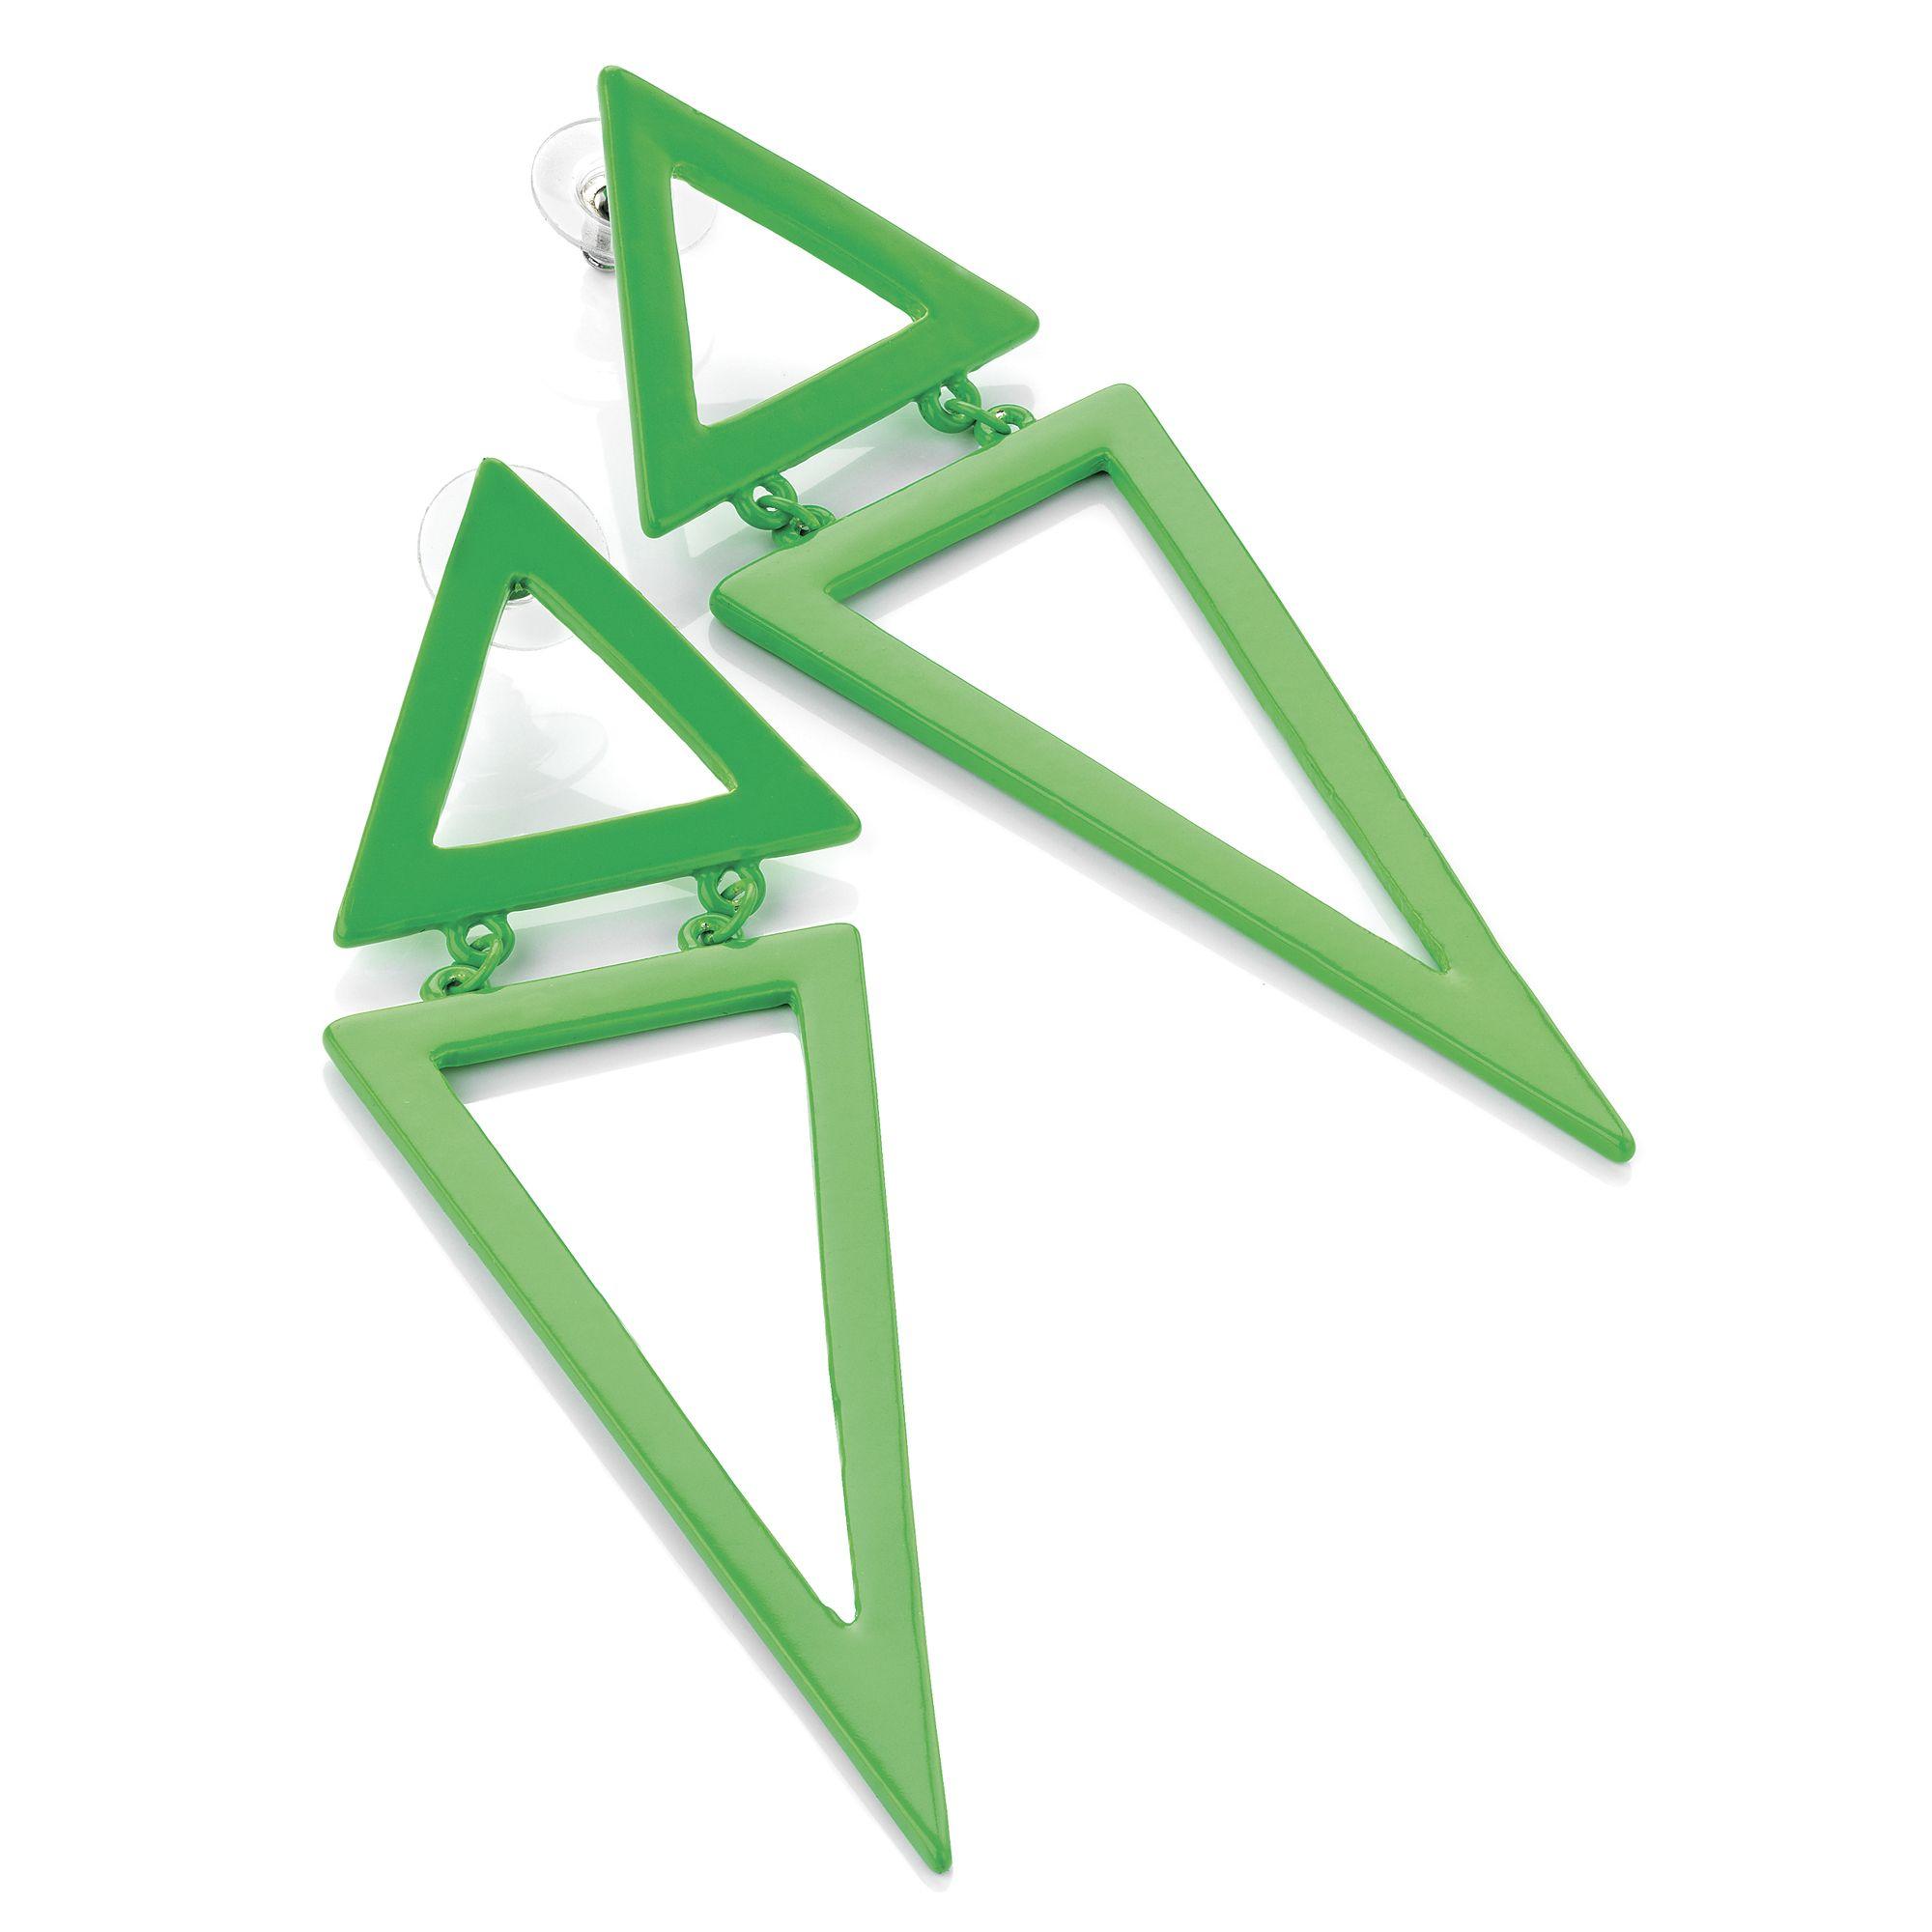 Neon Green Triangle Logo - Was 1.25 Each Now Only 0.45p Each! Neon green colour enamel triangle ...